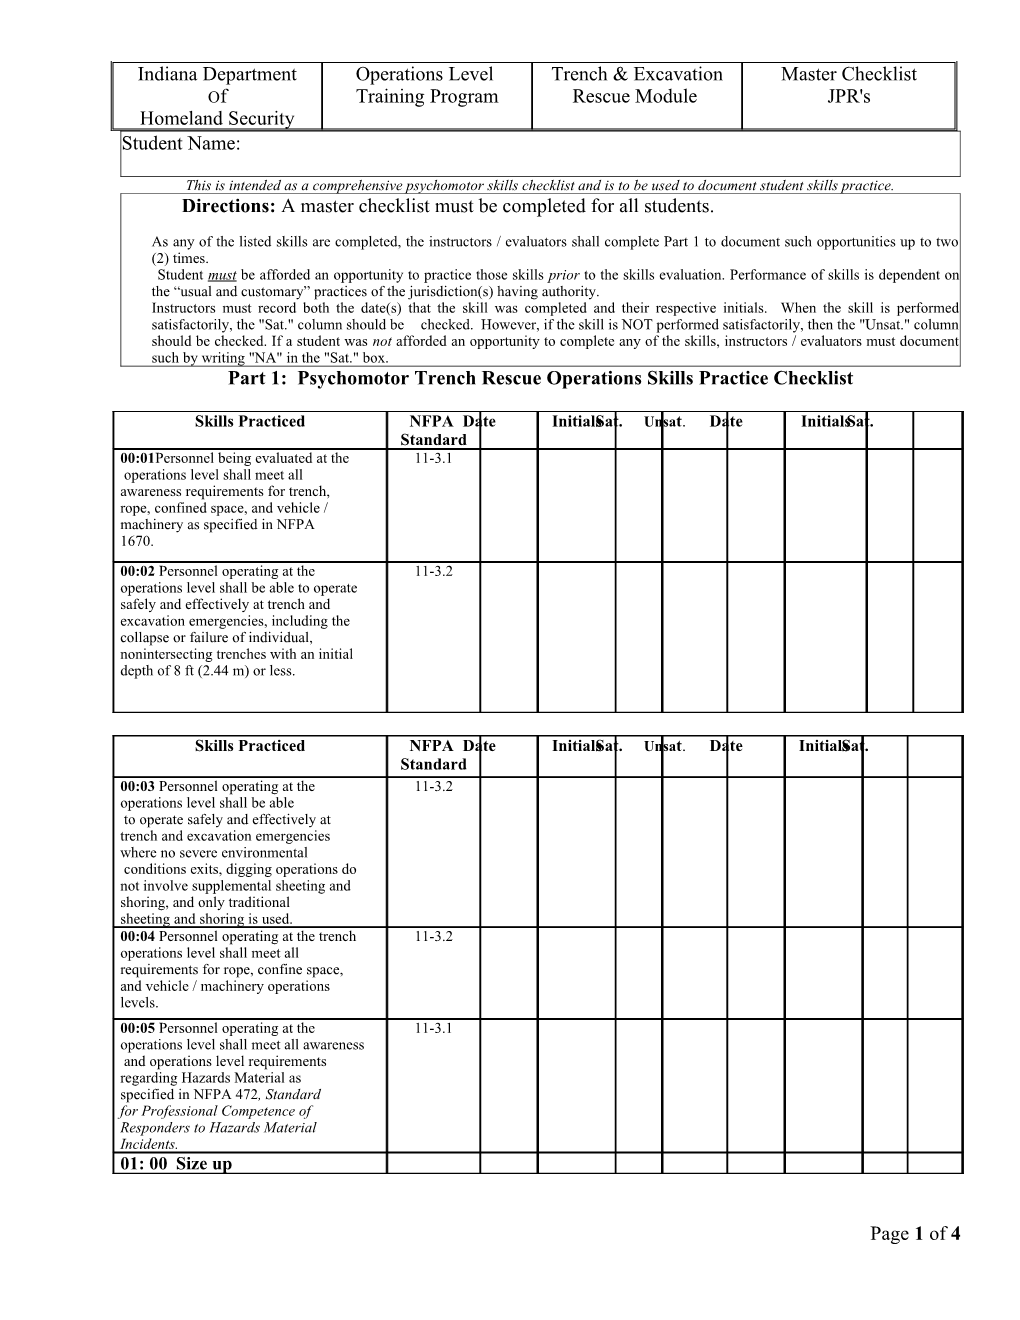 This Is Intended As a Comprehensive Psychomotor Skills Checklist and Is to Be Used to Document